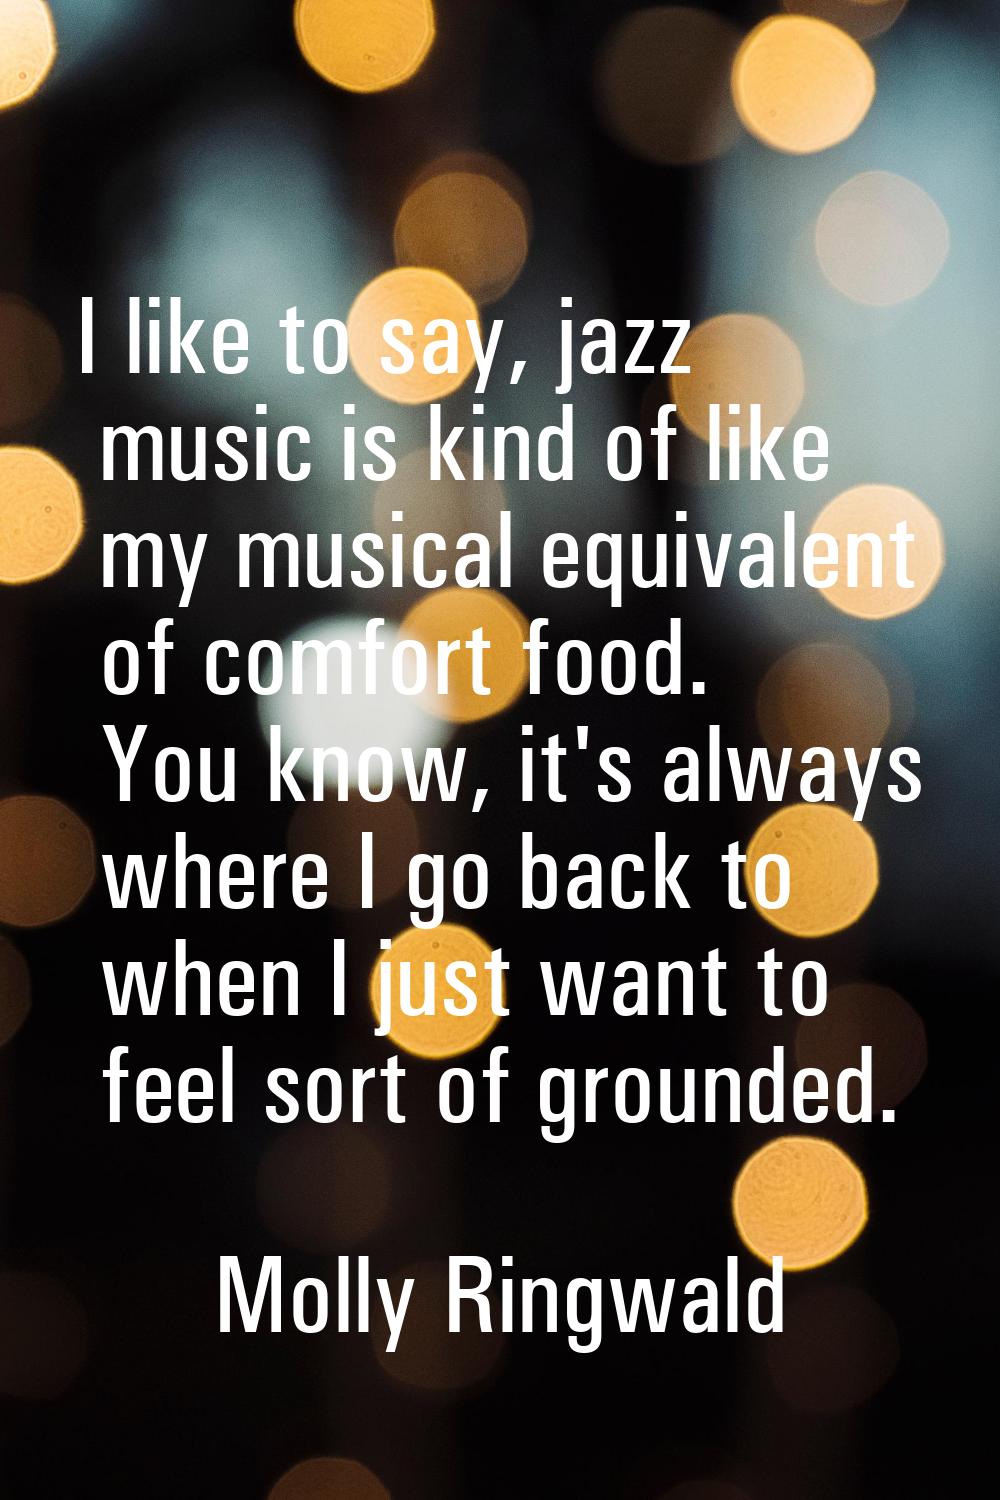 I like to say, jazz music is kind of like my musical equivalent of comfort food. You know, it's alw